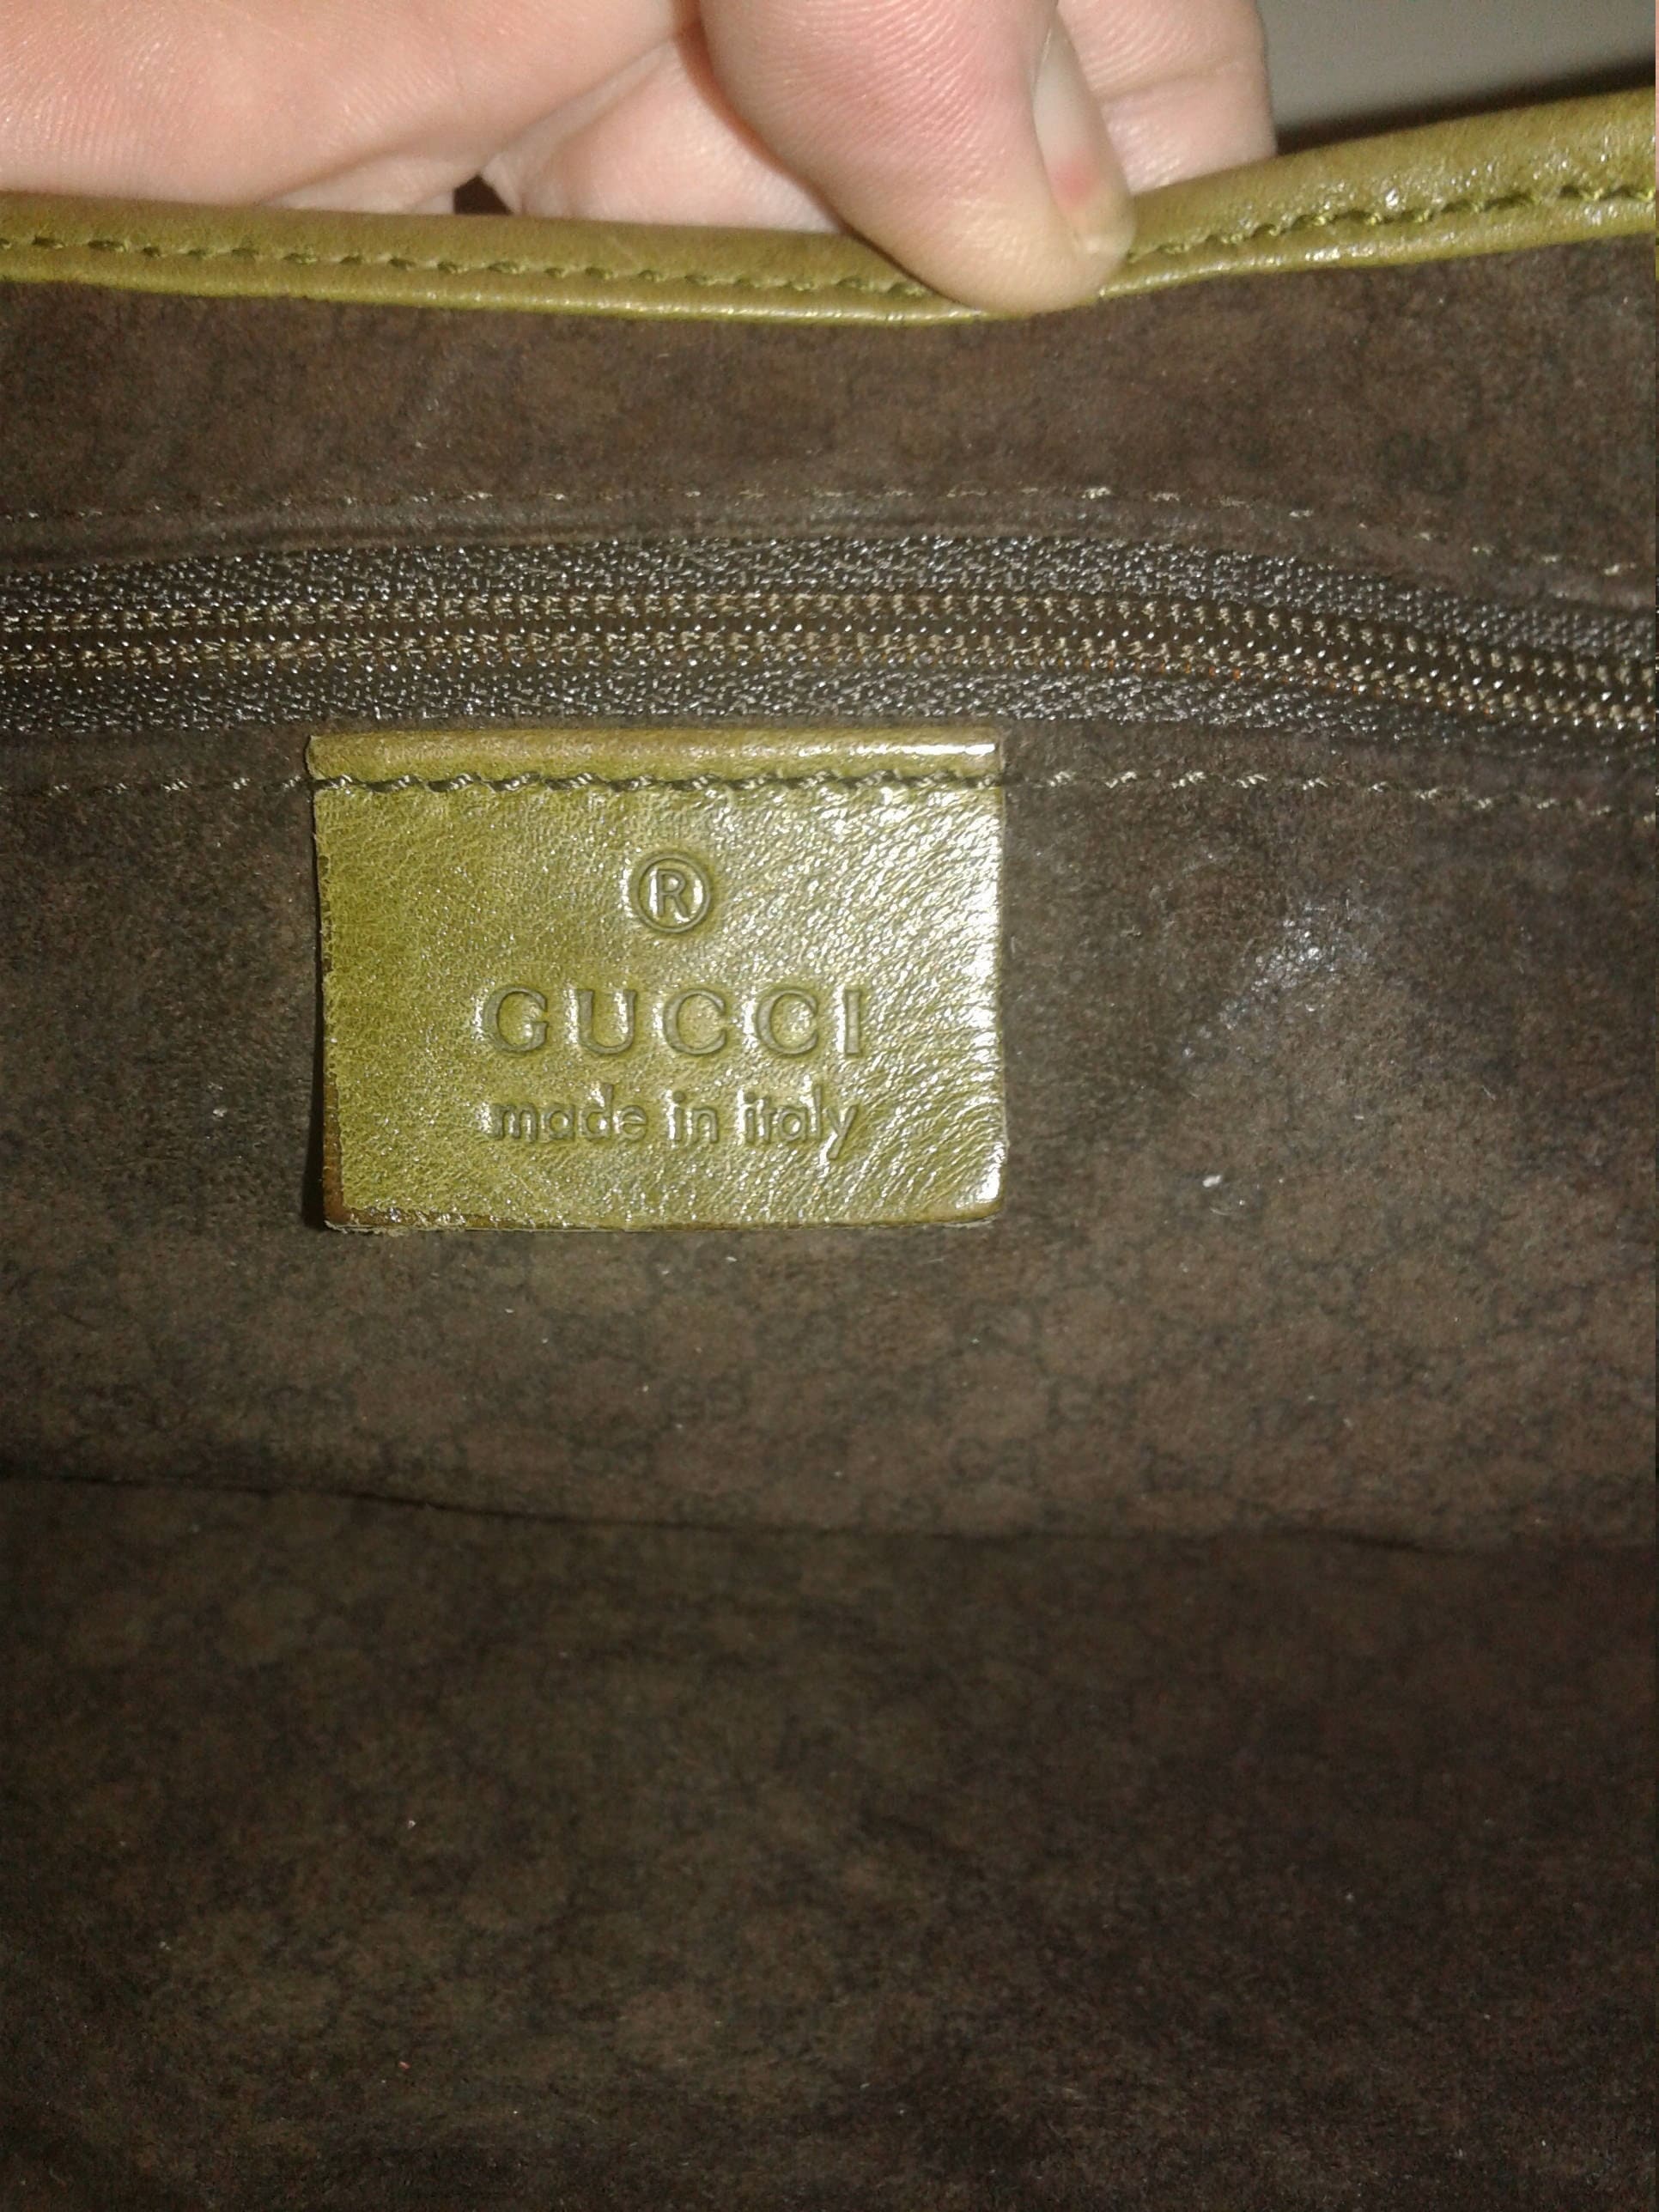 how to verify gucci serial number